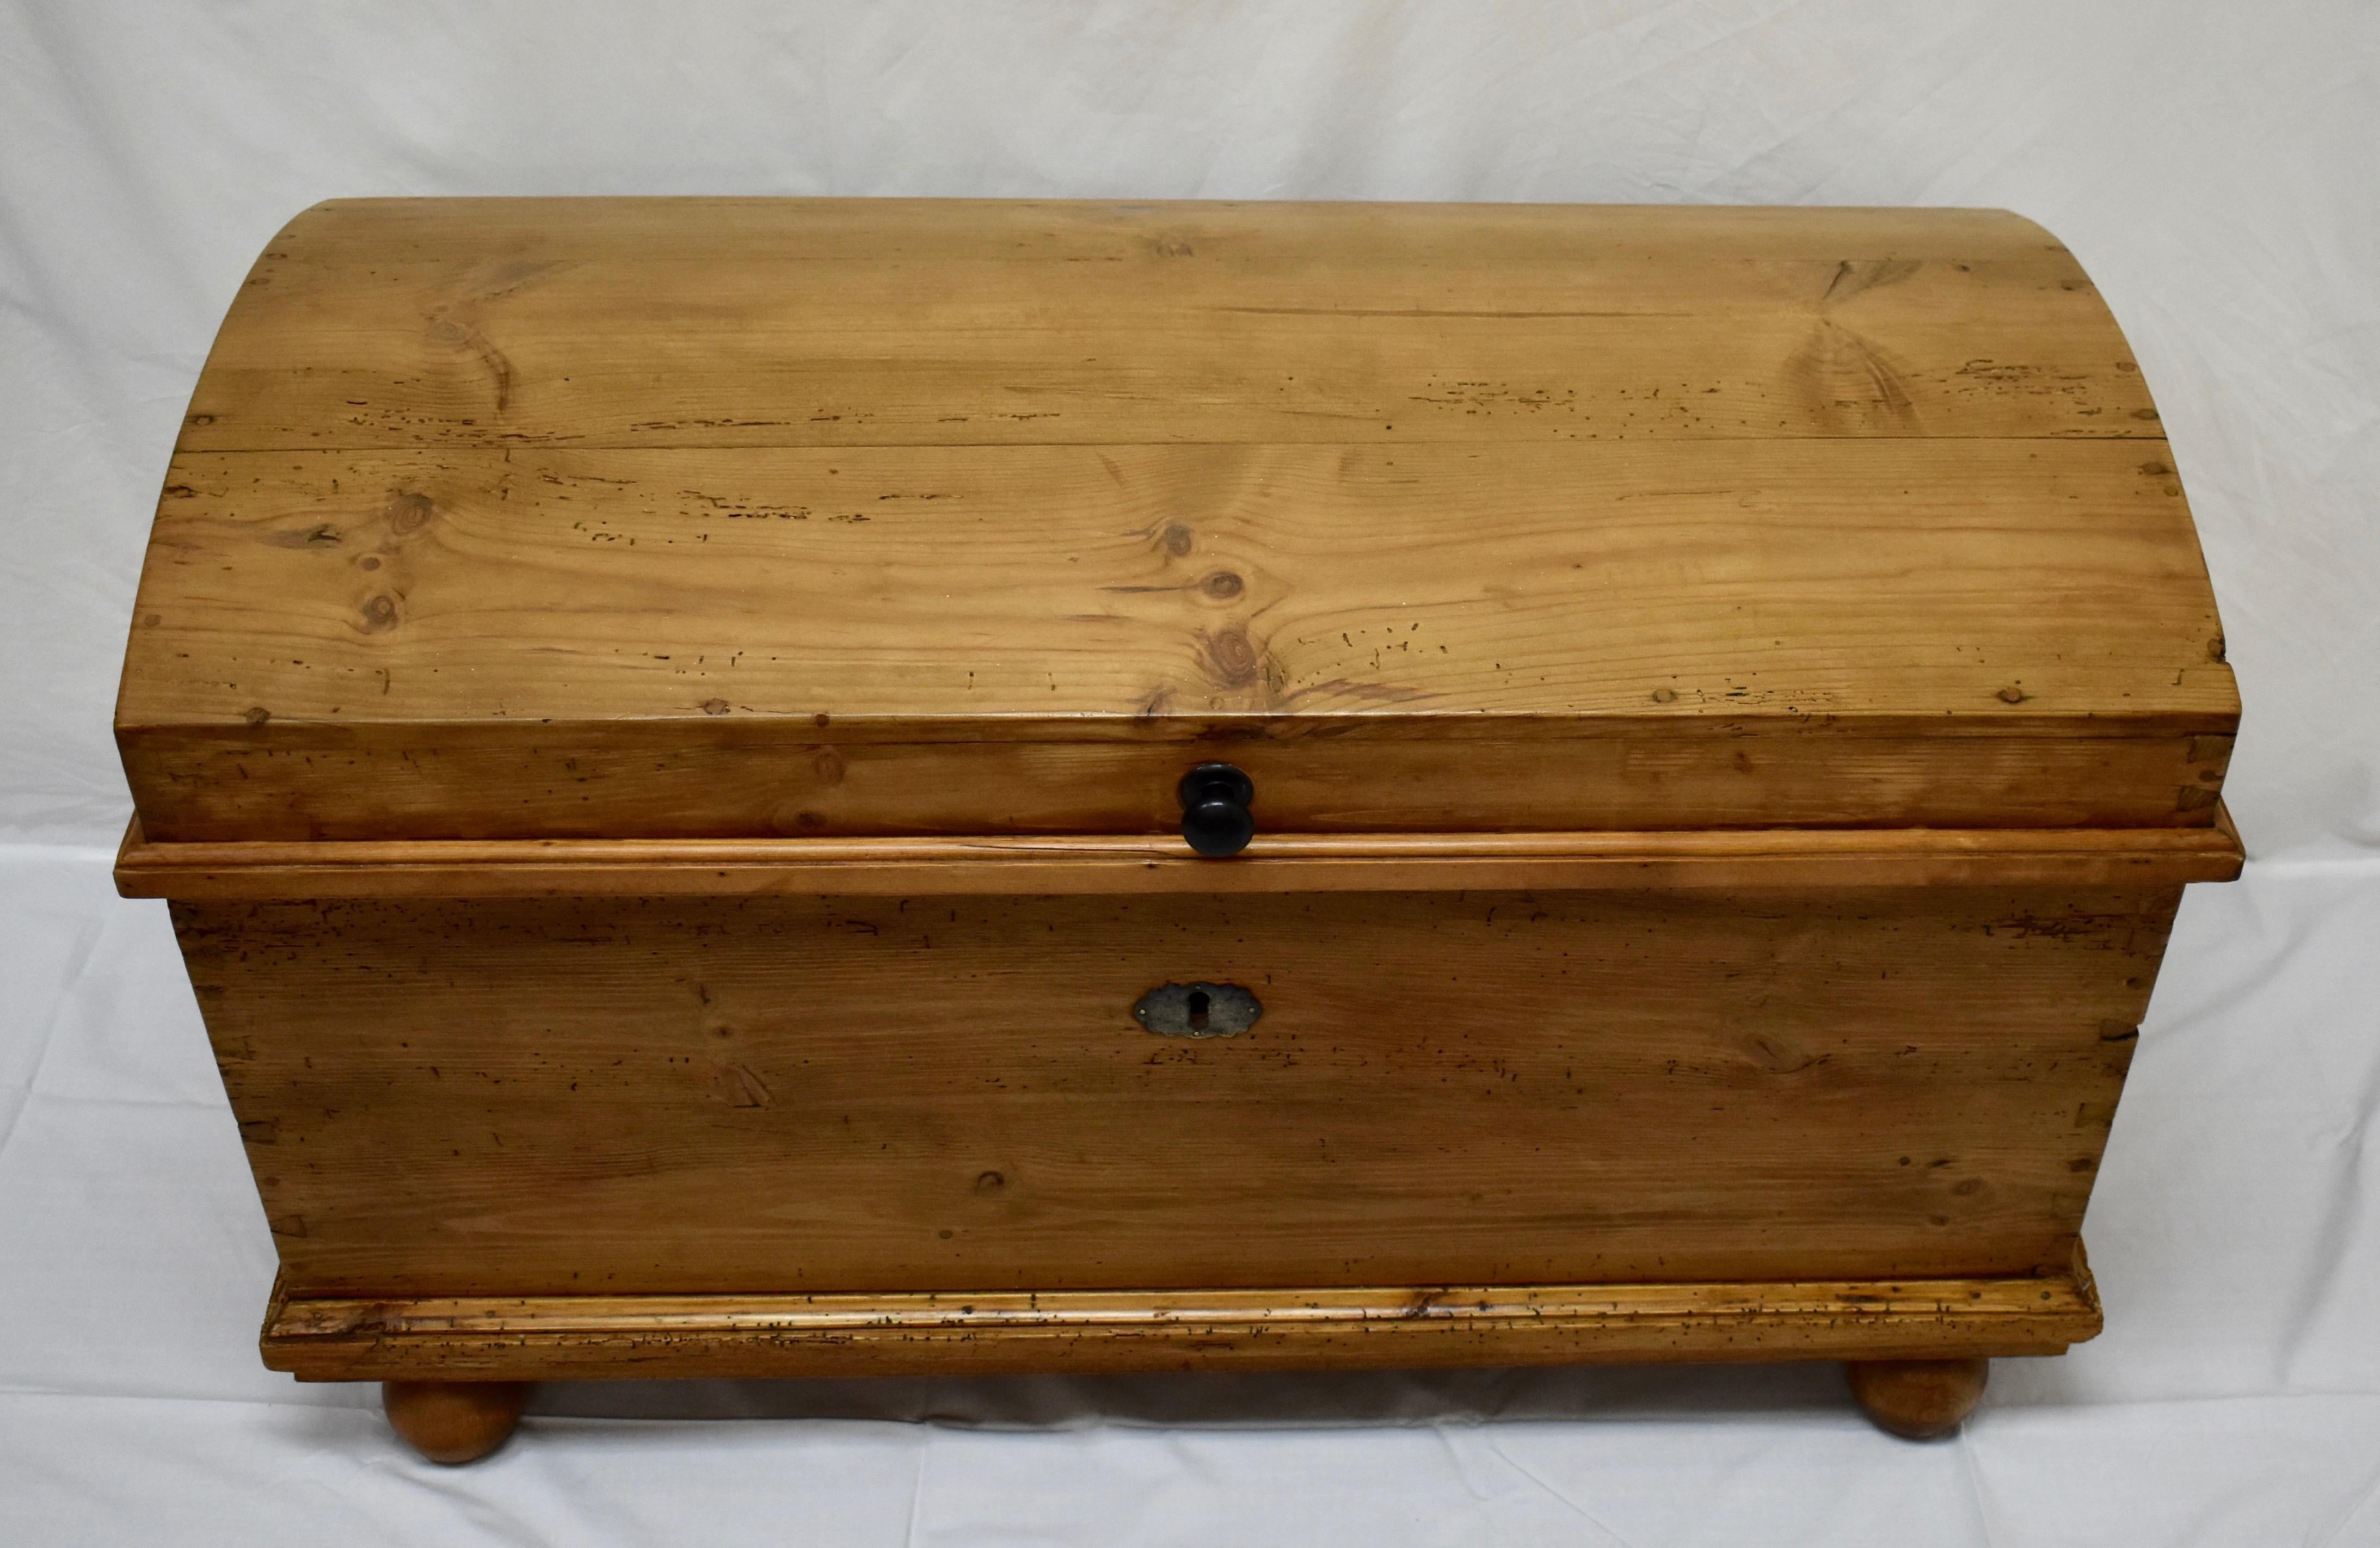 This is a very handsome pine dome-top trunk, the four board top in very good order and attached entirely with wooden pegs. The sides are beautifully tapered, with original iron handles. There are exposed handcut dovetails on the corners, bold